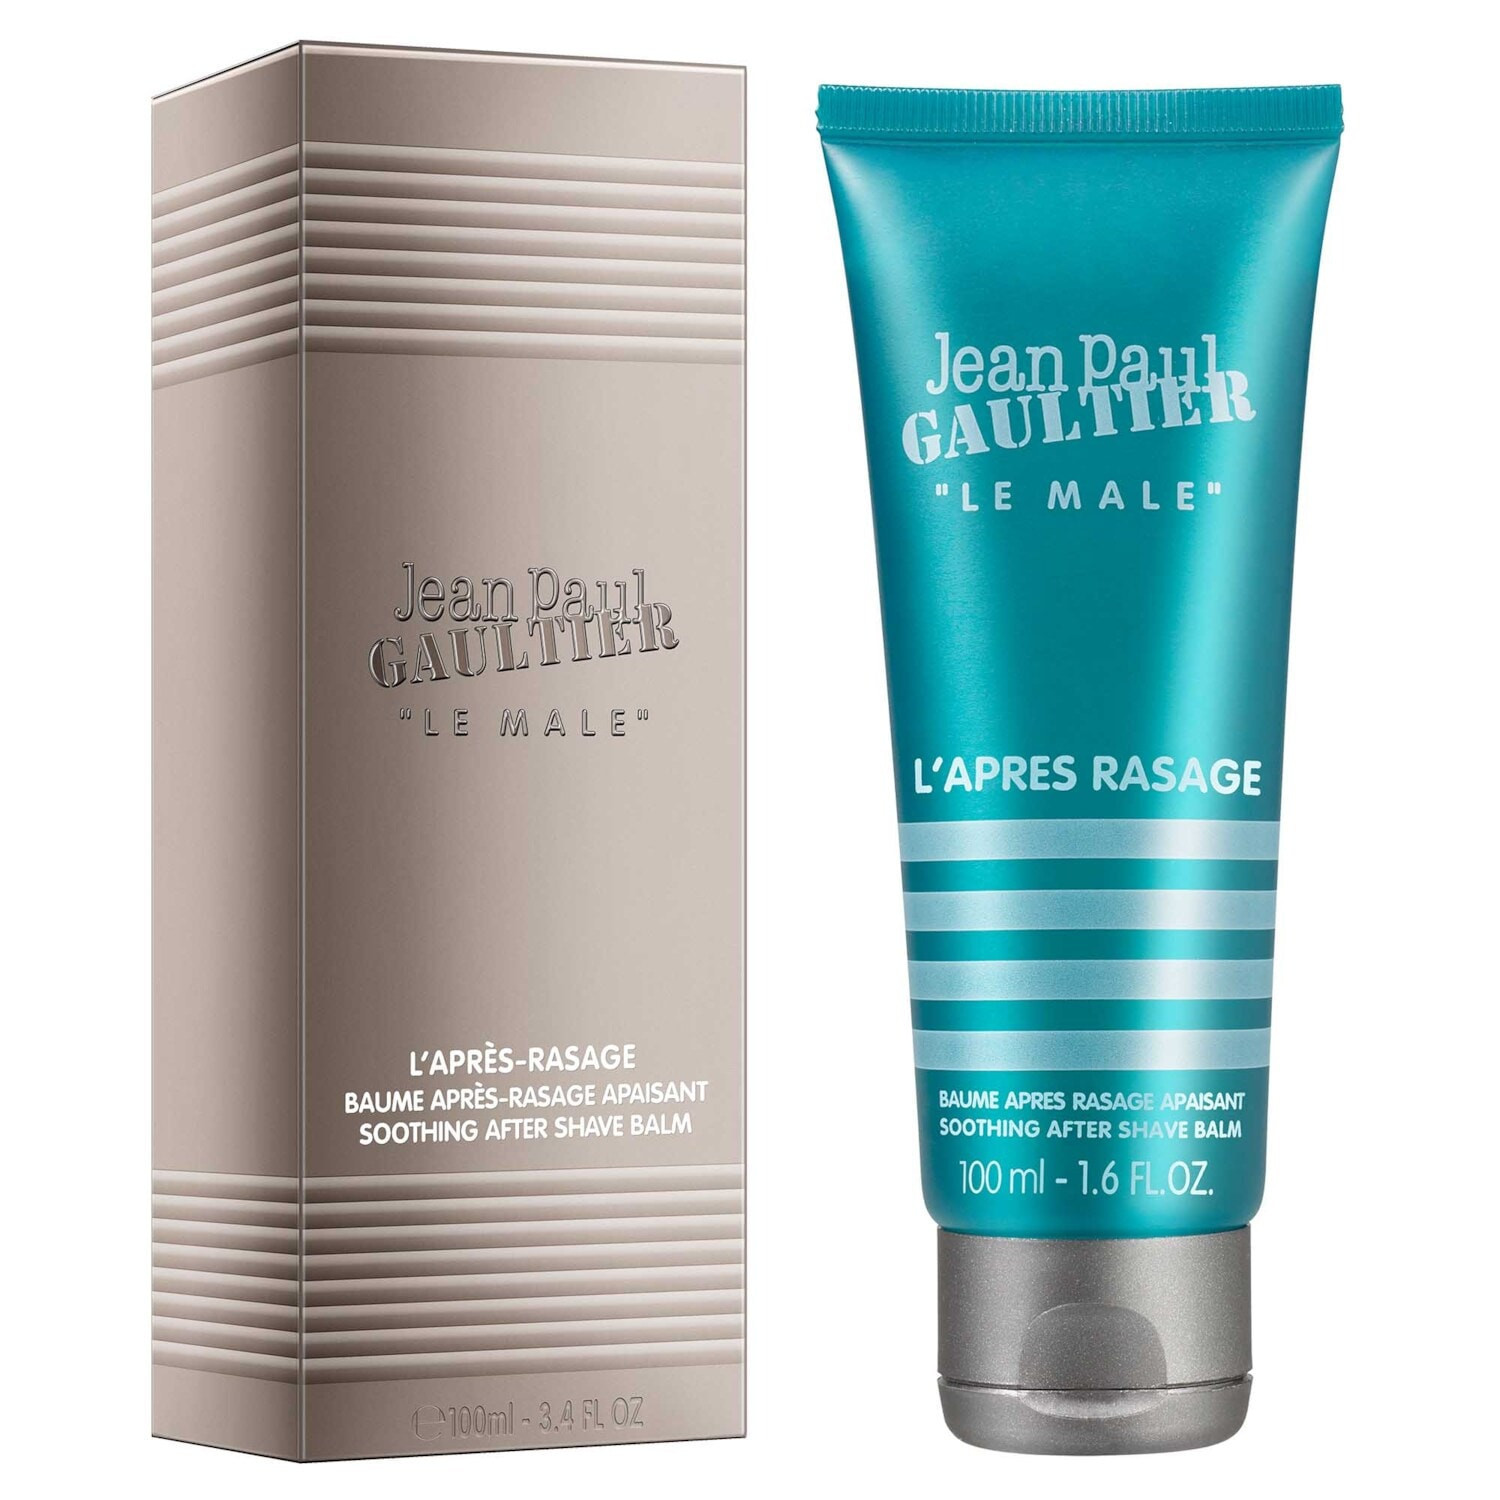 agitation tennis forgænger Le Male Jean Paul Gaultier Soothing After Shave Balm 100ML